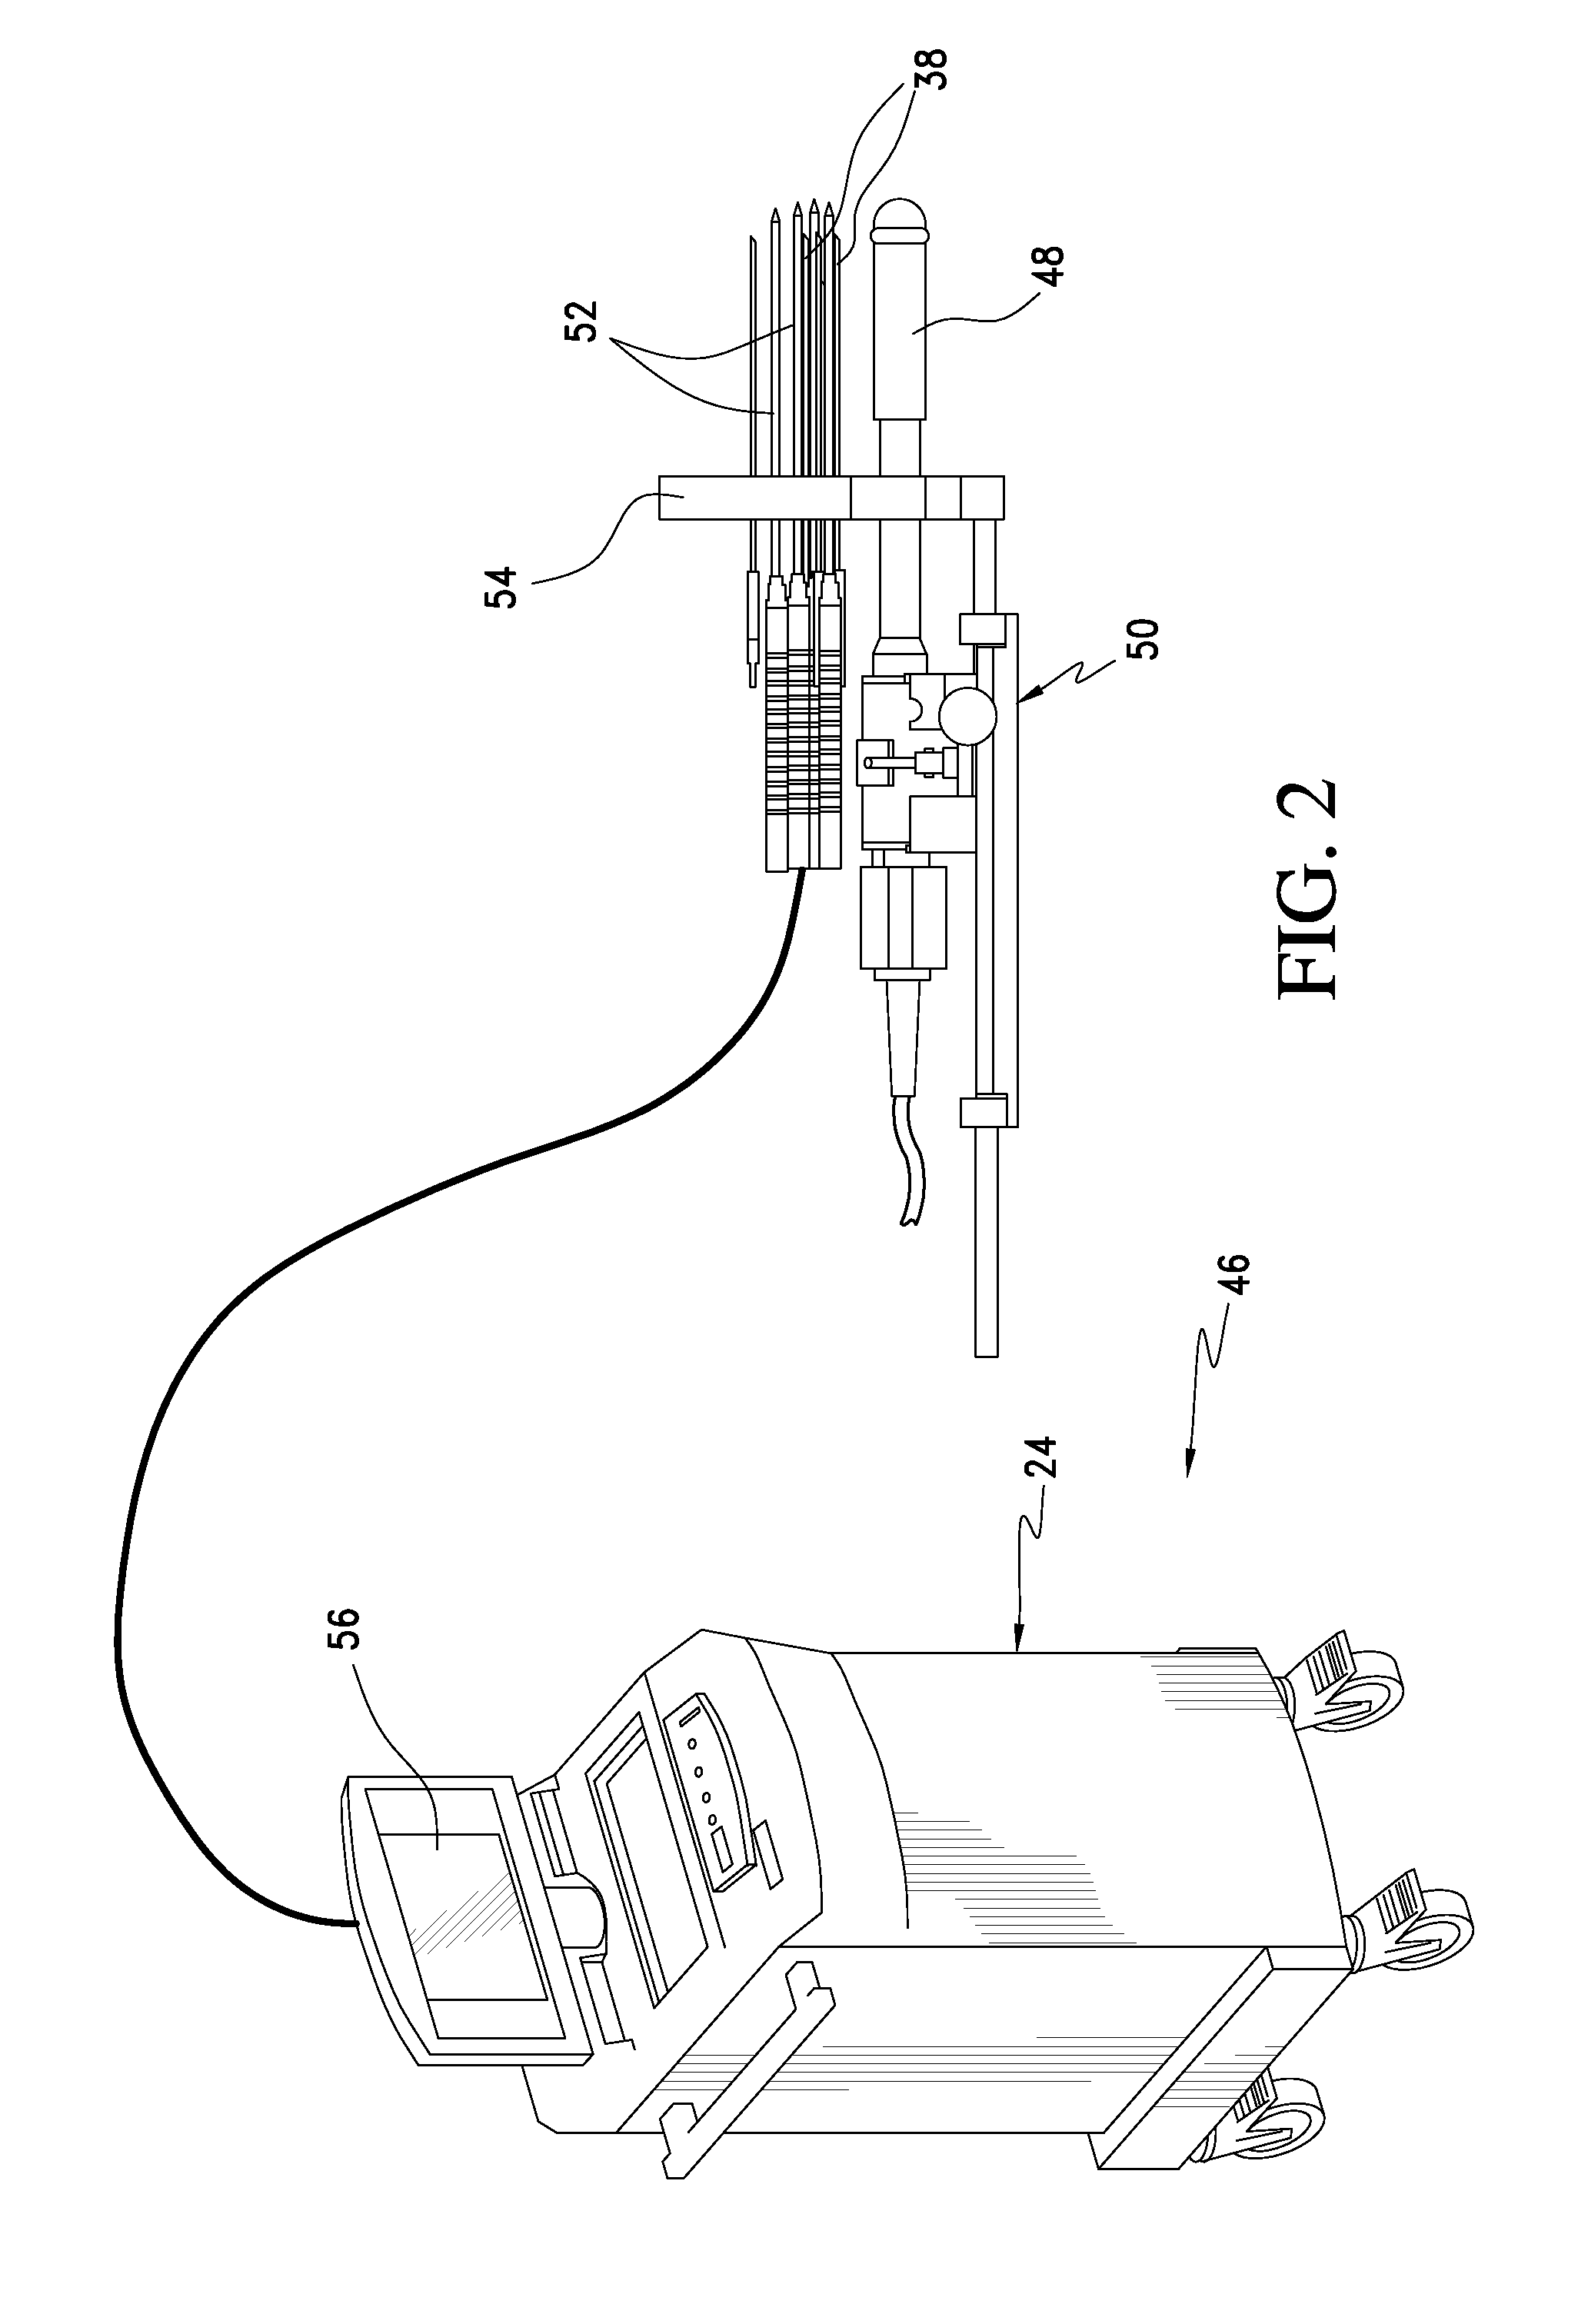 System for providing computer guided ablation of tissue